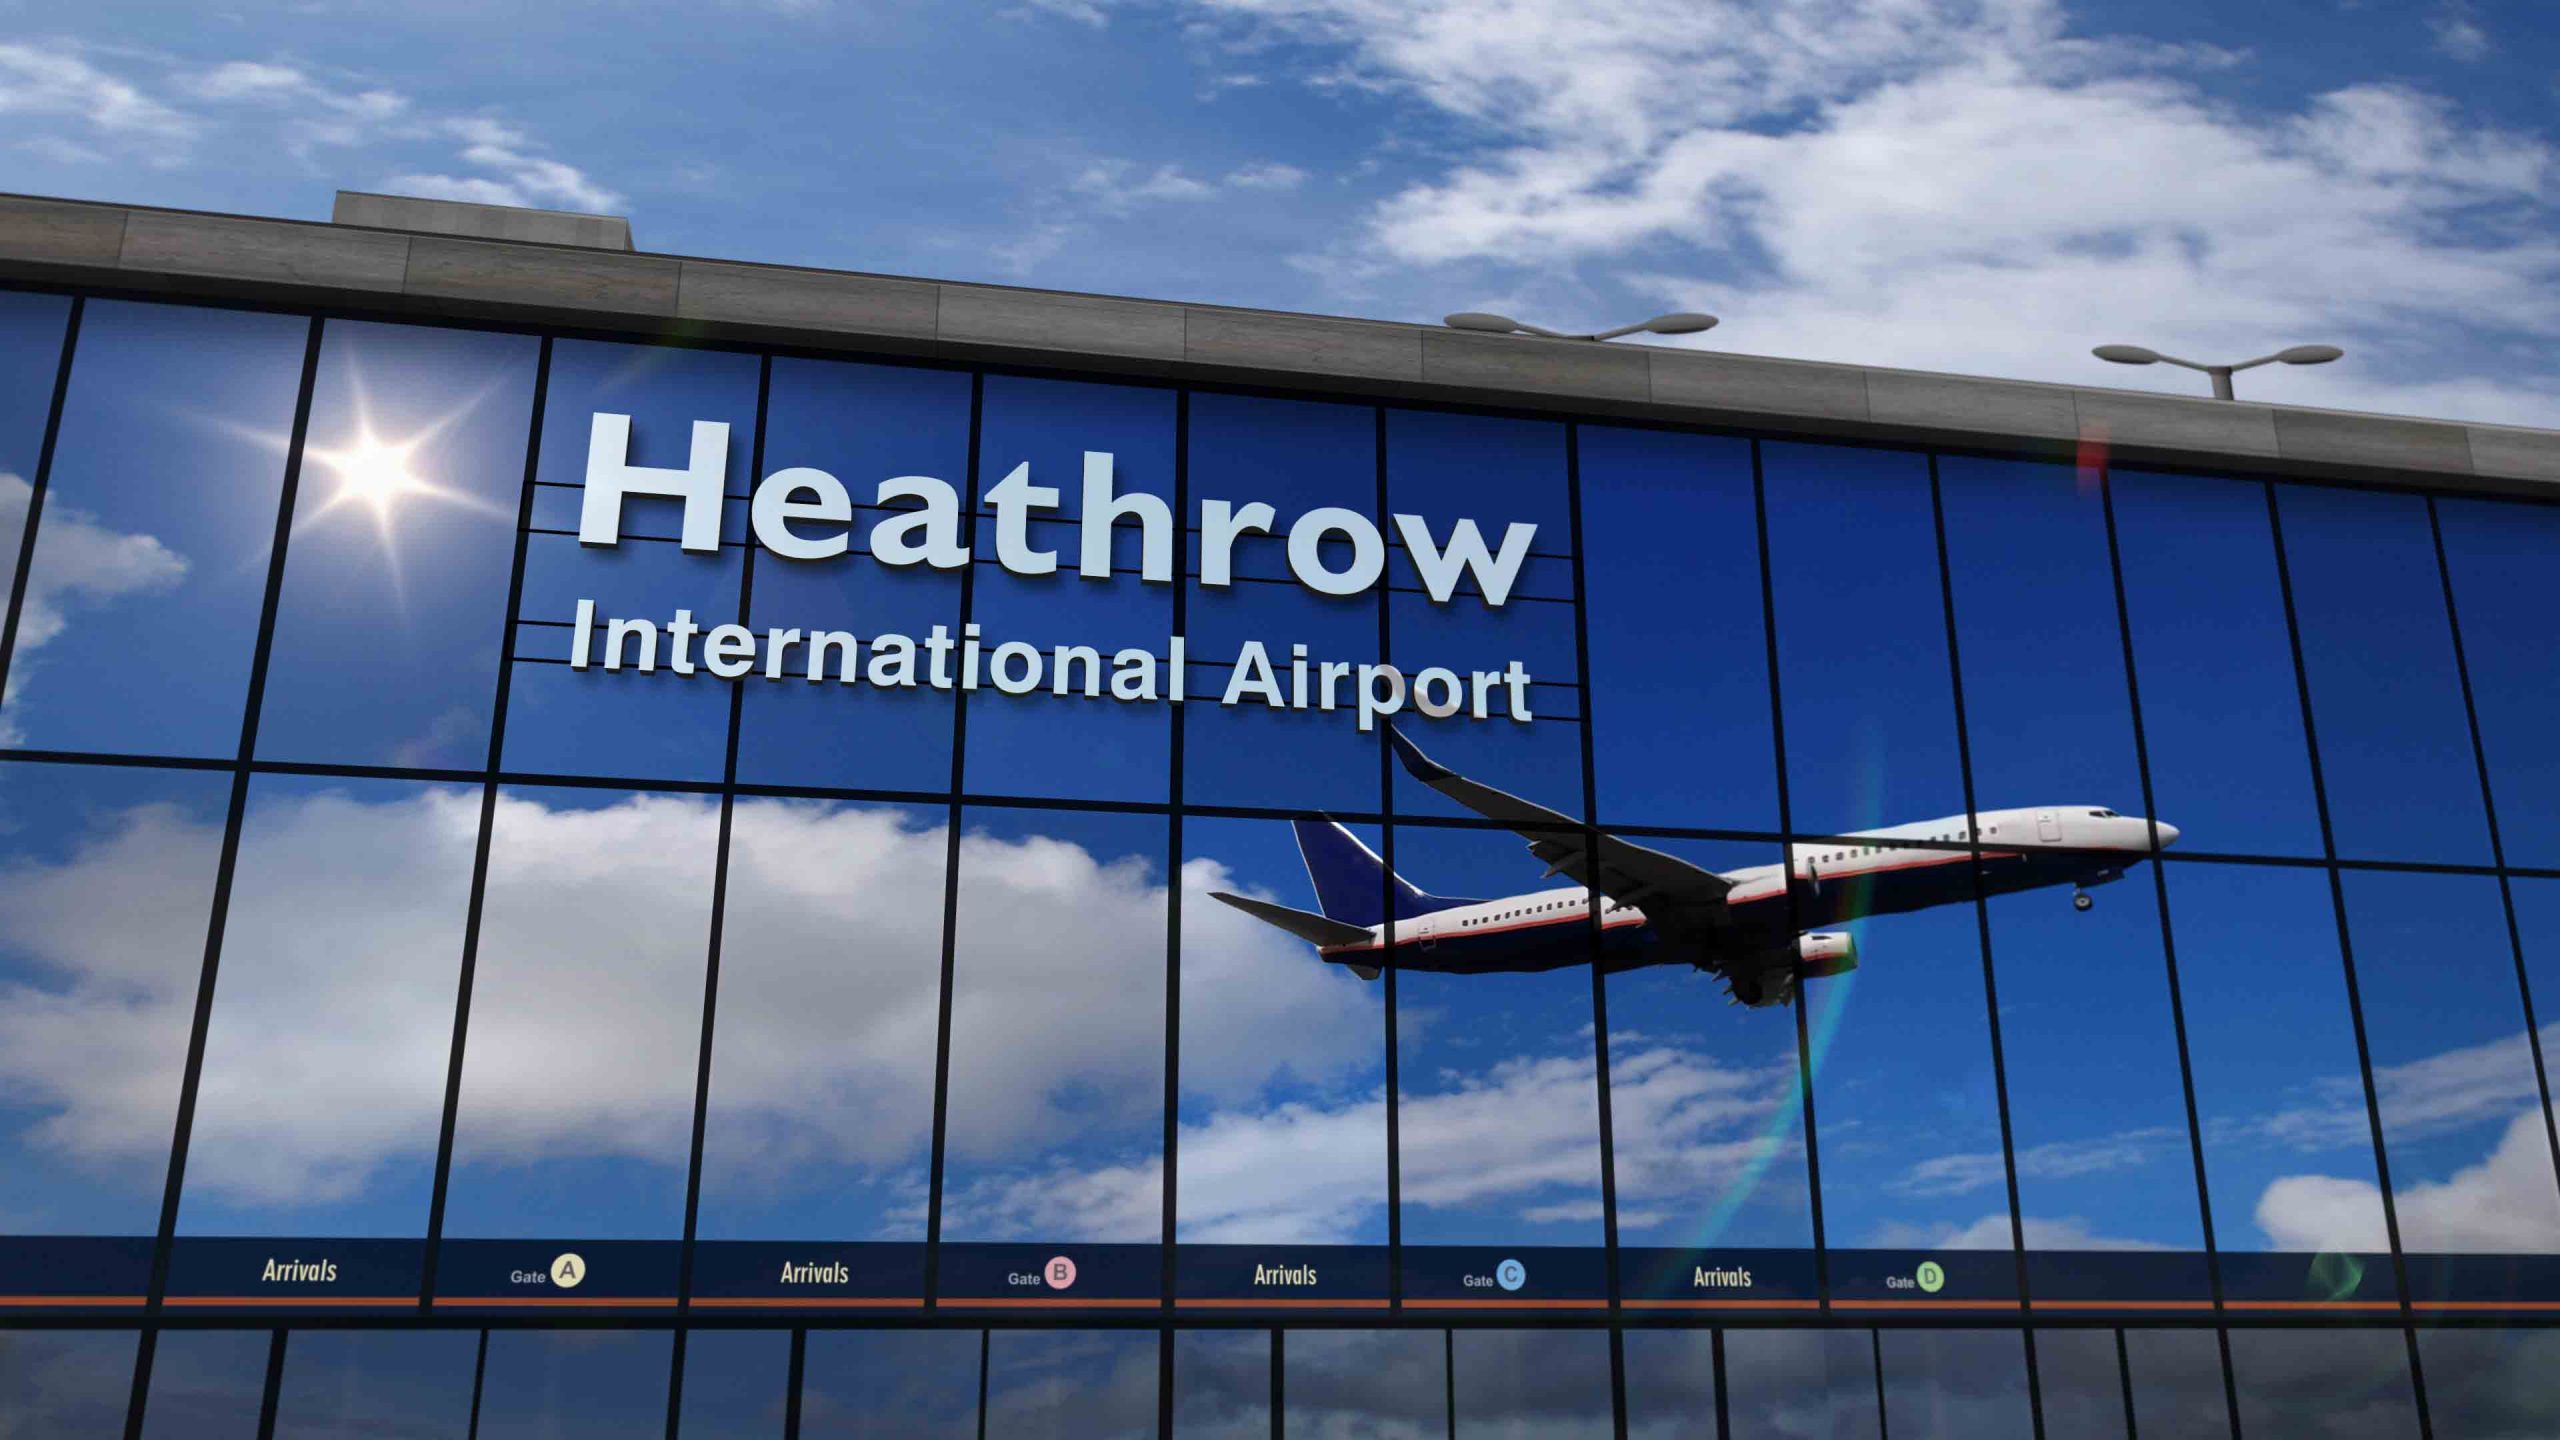 London's Heathrow airport imposes capacity cap of 100,000 passengers a day  - TravelBiz Monitor: India travel news, travel trends, tourism